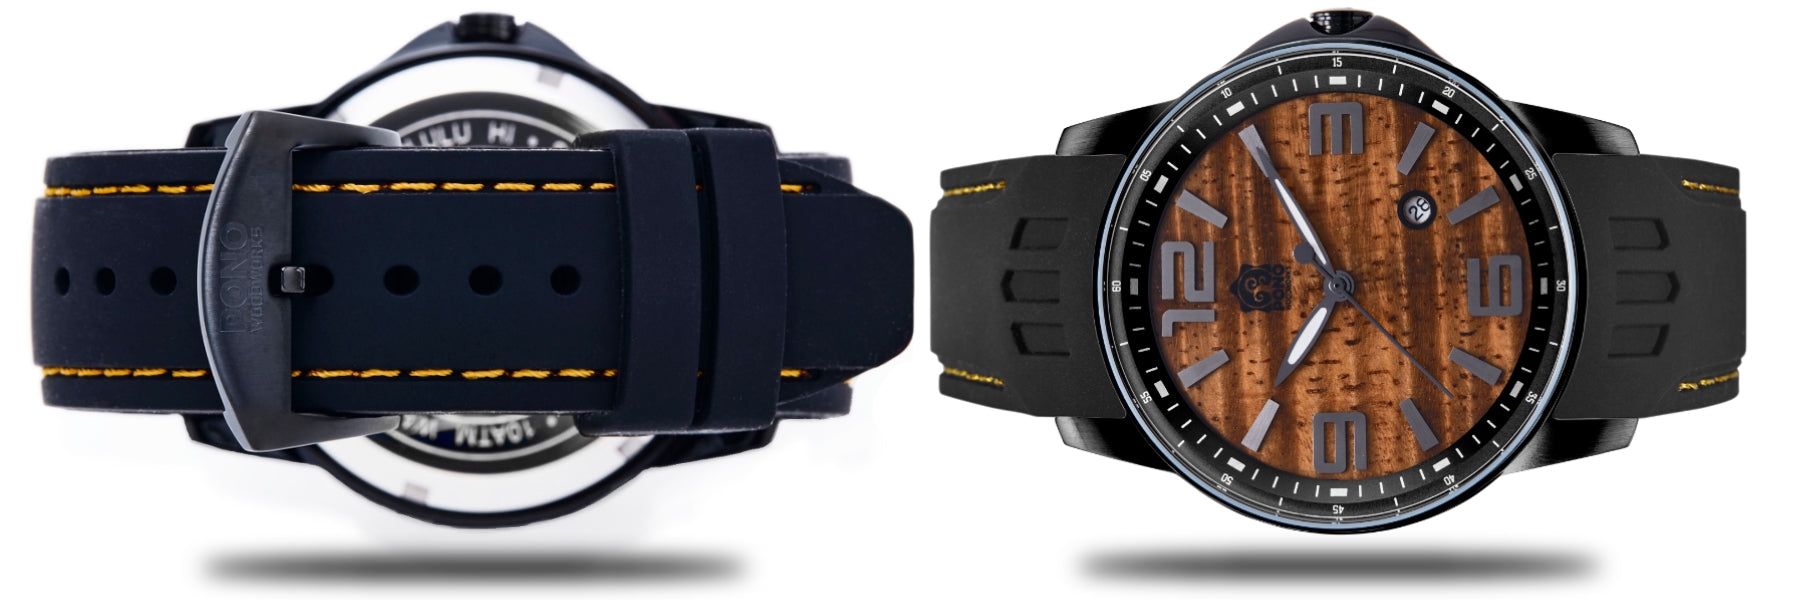 font and back view of blackout surfrider koa watch floating on side